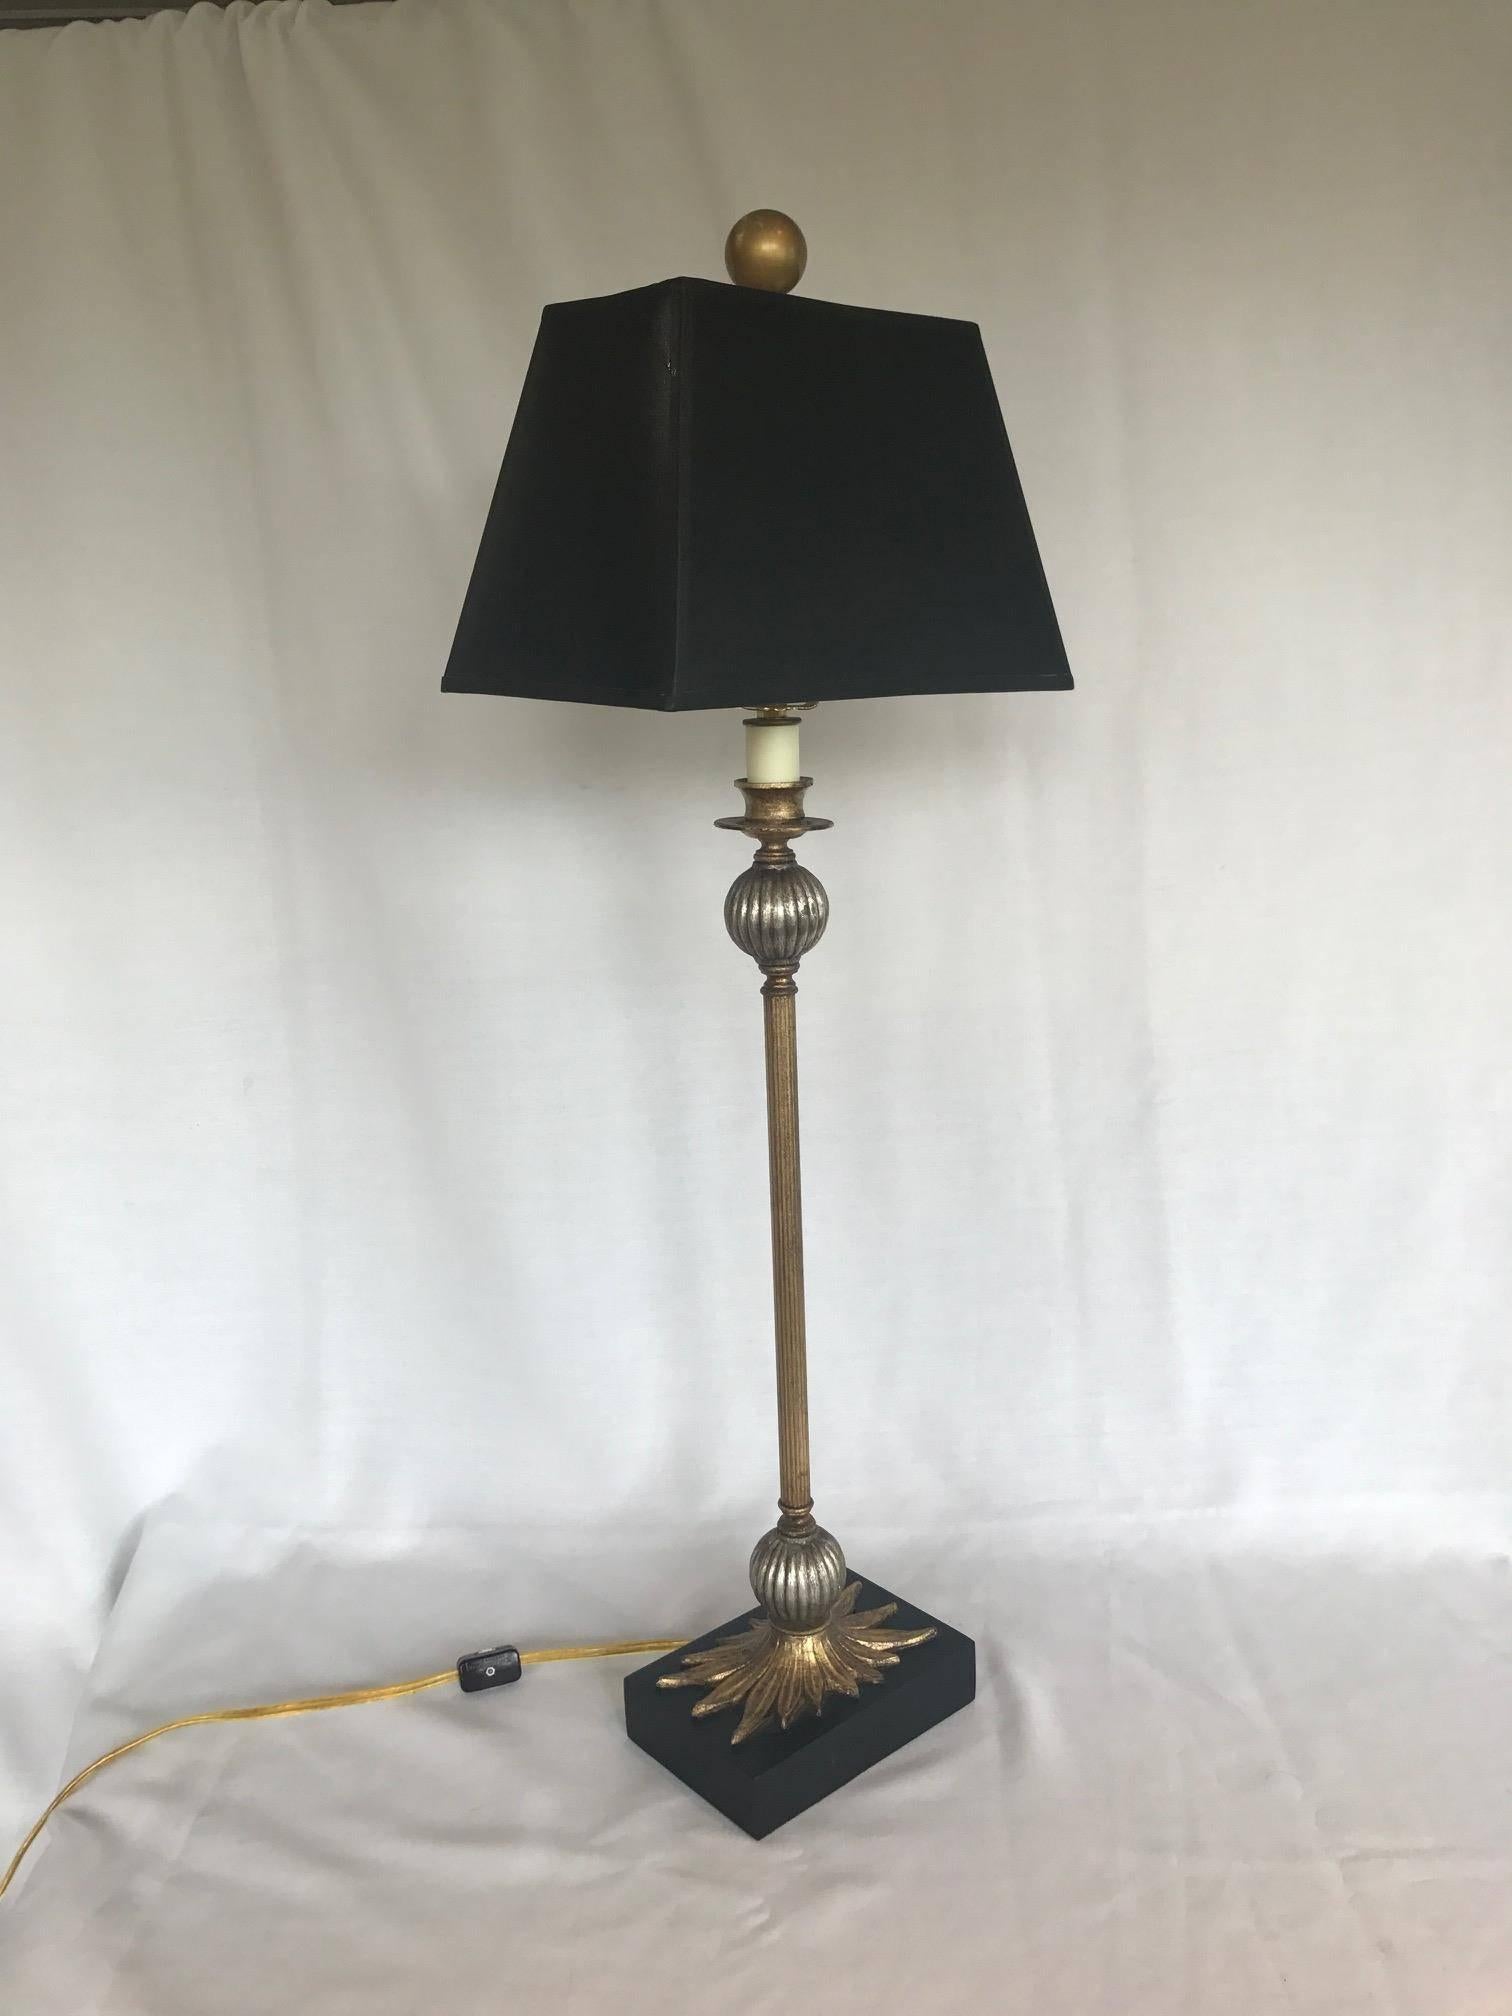 Pair of Maison Jansen style candlestick lamps with textured shades. Fabulous pair of elegant lamps from a beautiful Fairfield, Connecticut estate. 

Shade dimensions:
H 7
L 10
D 7.